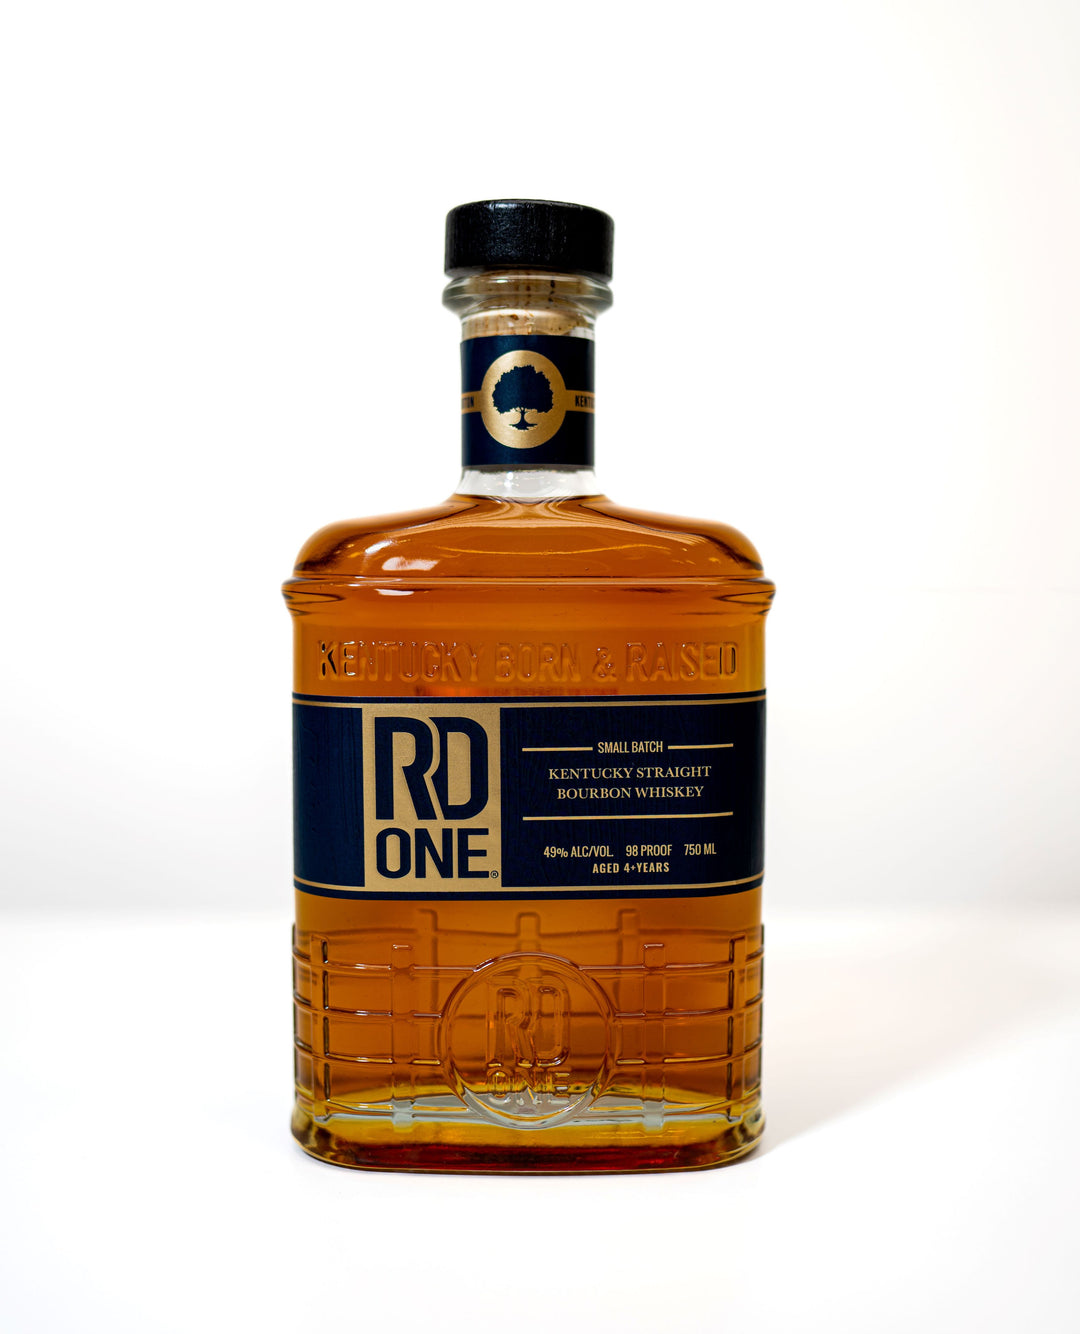 RD One Kentucky Straight Bourbon Whiskey 98 Proof